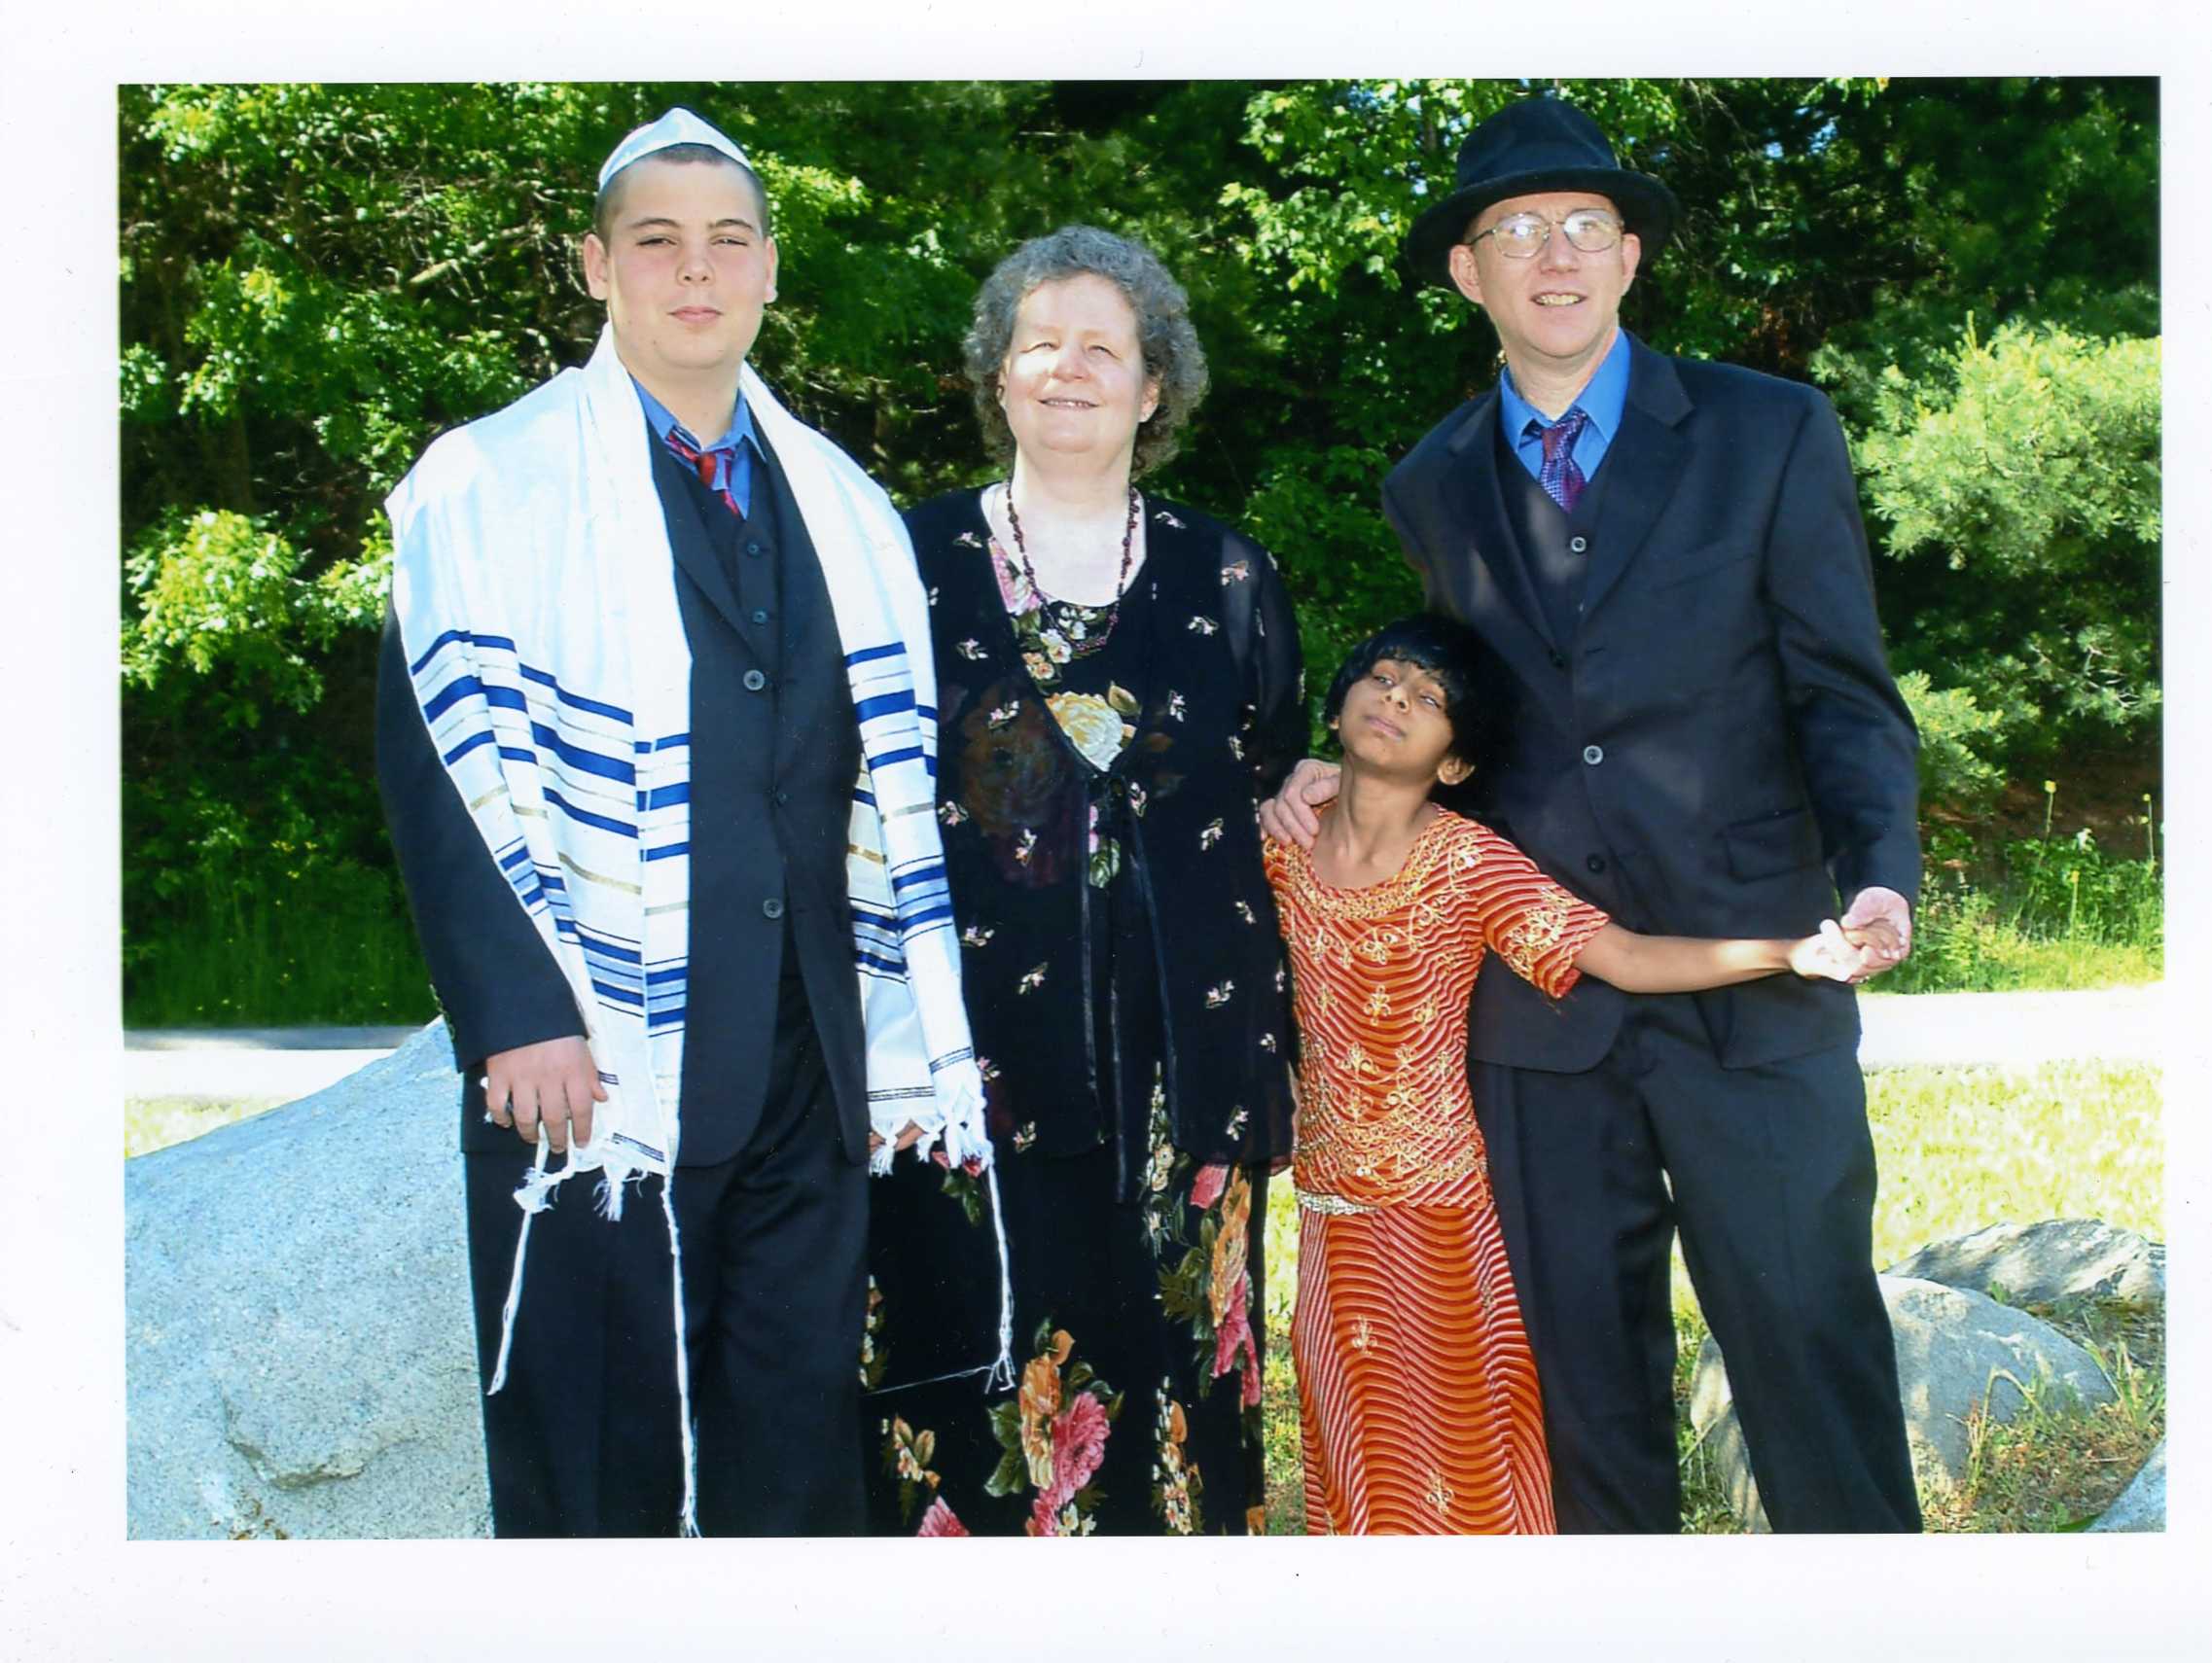 photo of Seth, Caryn Diya, and David on the occasion of Seth's Bar Mitzvah in June 2004